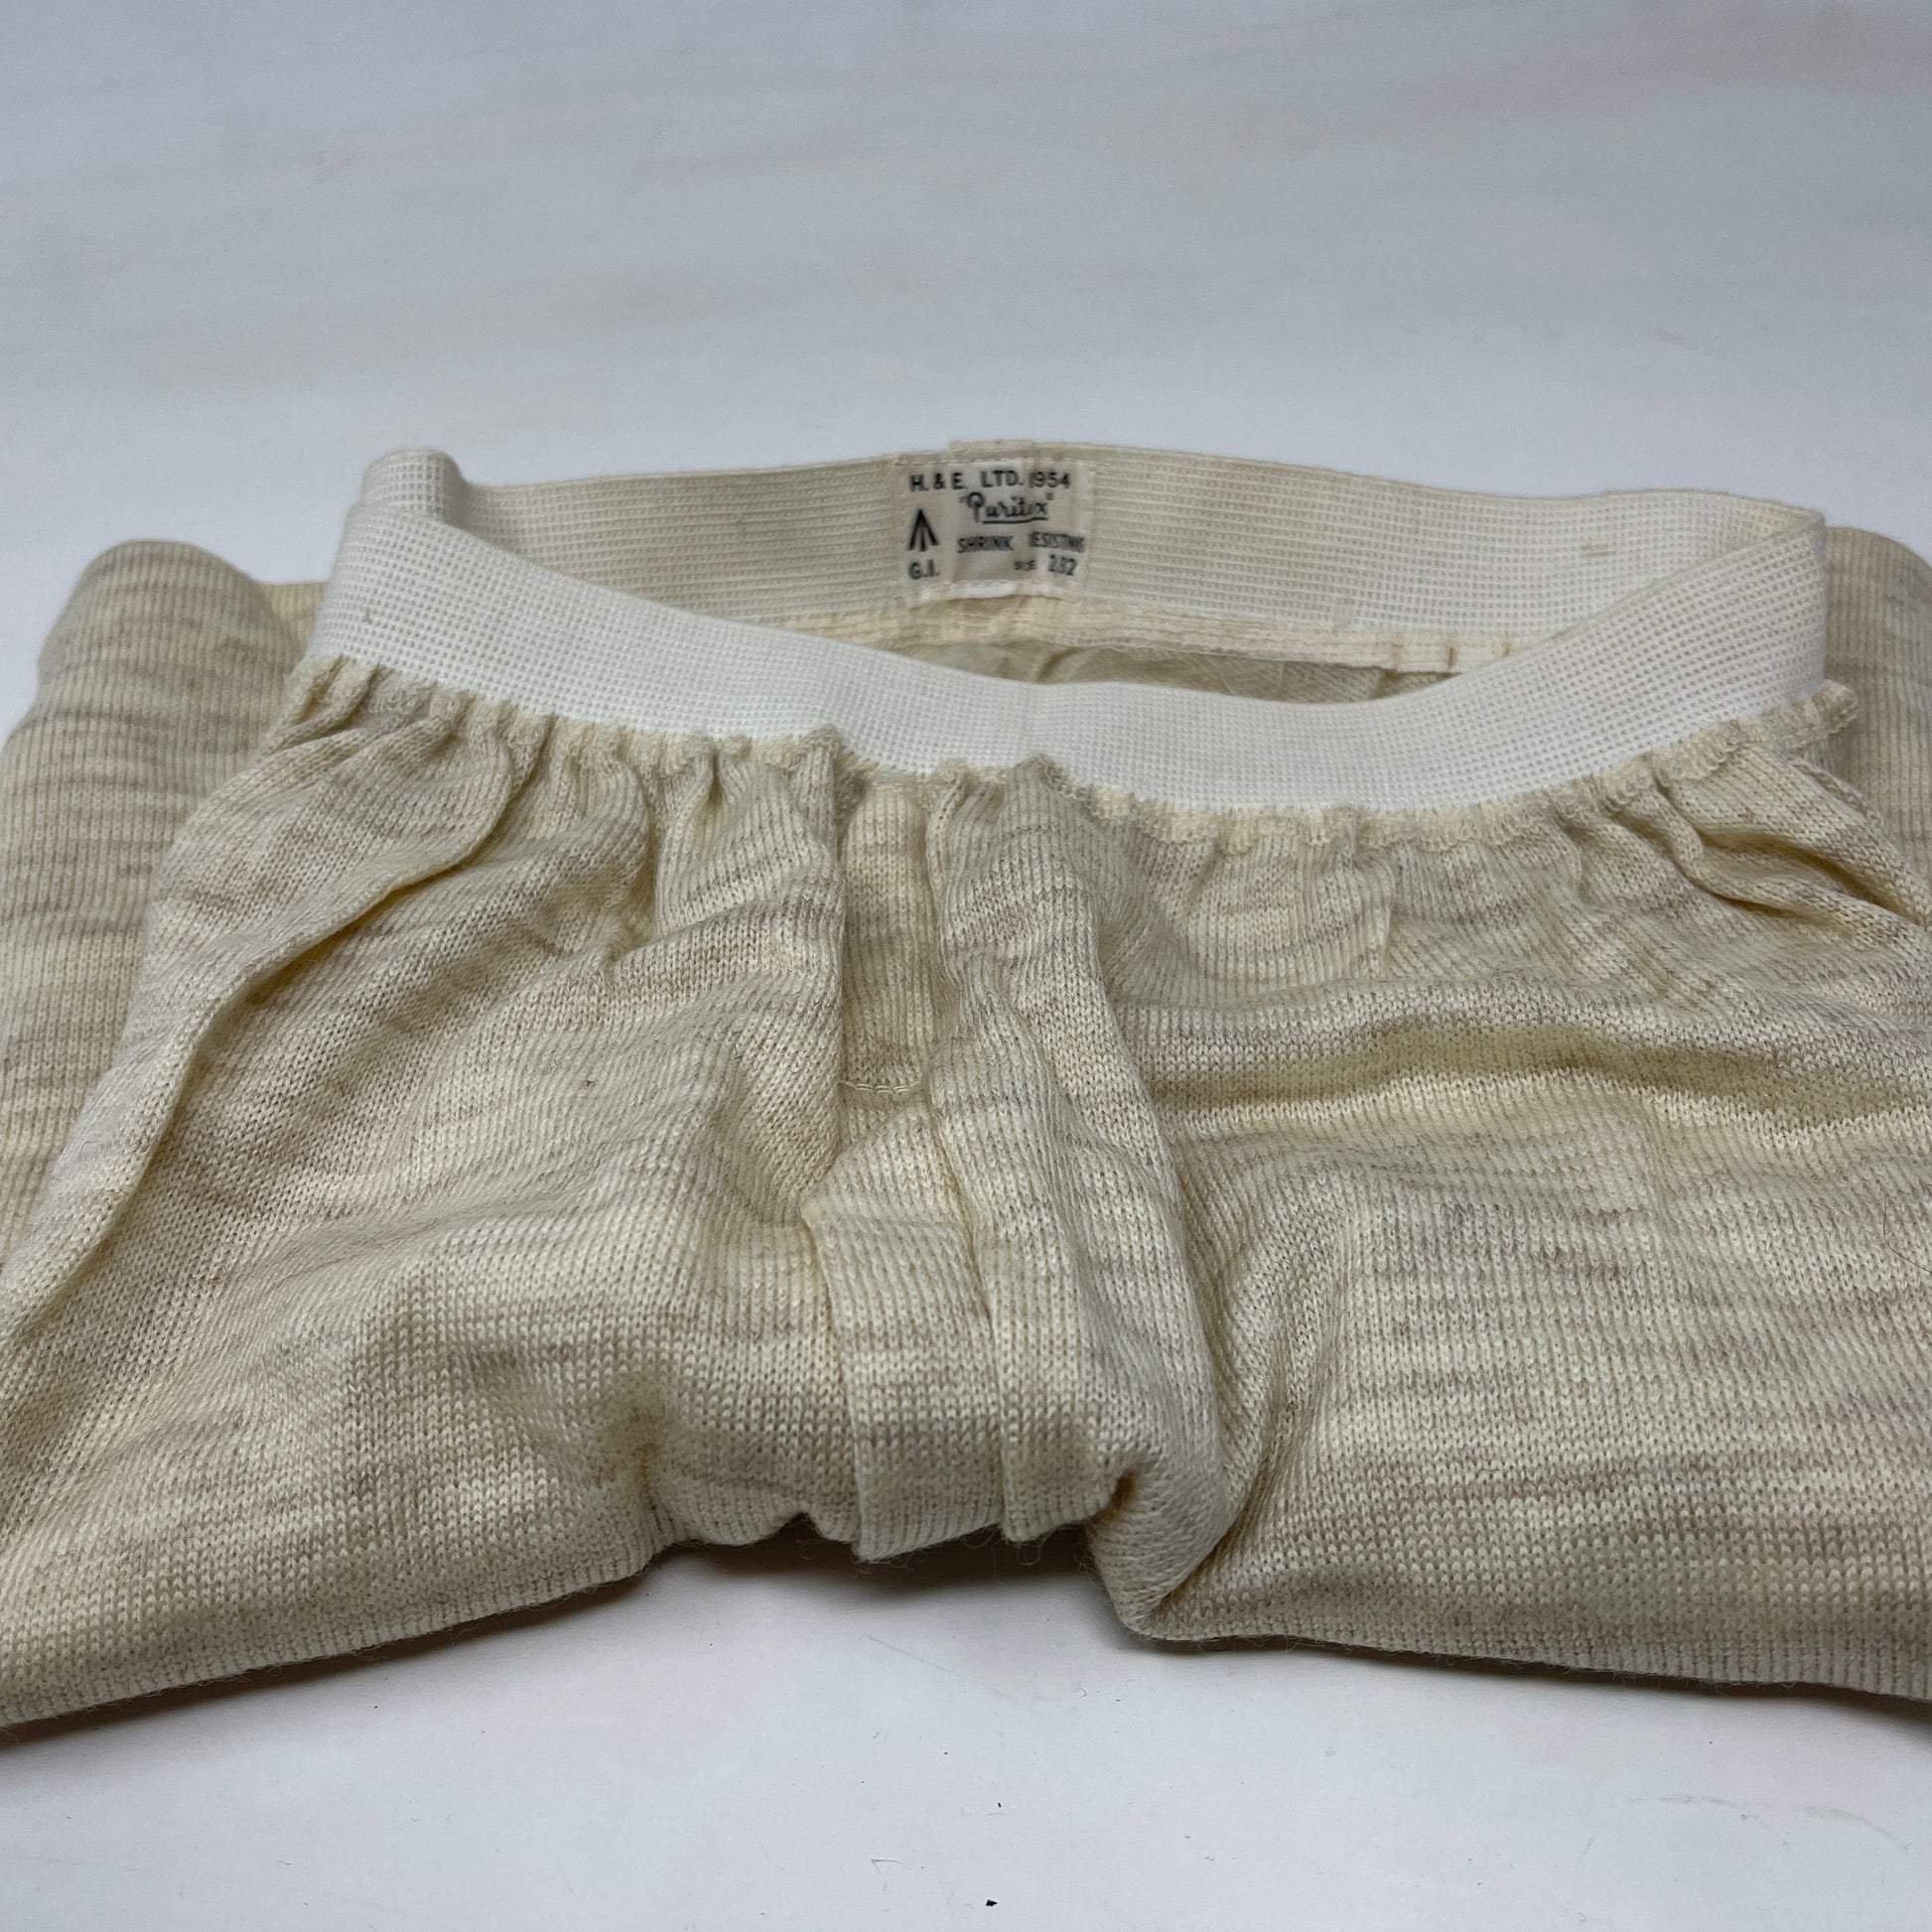 1954 Briitish Army Wool Underpants showing label